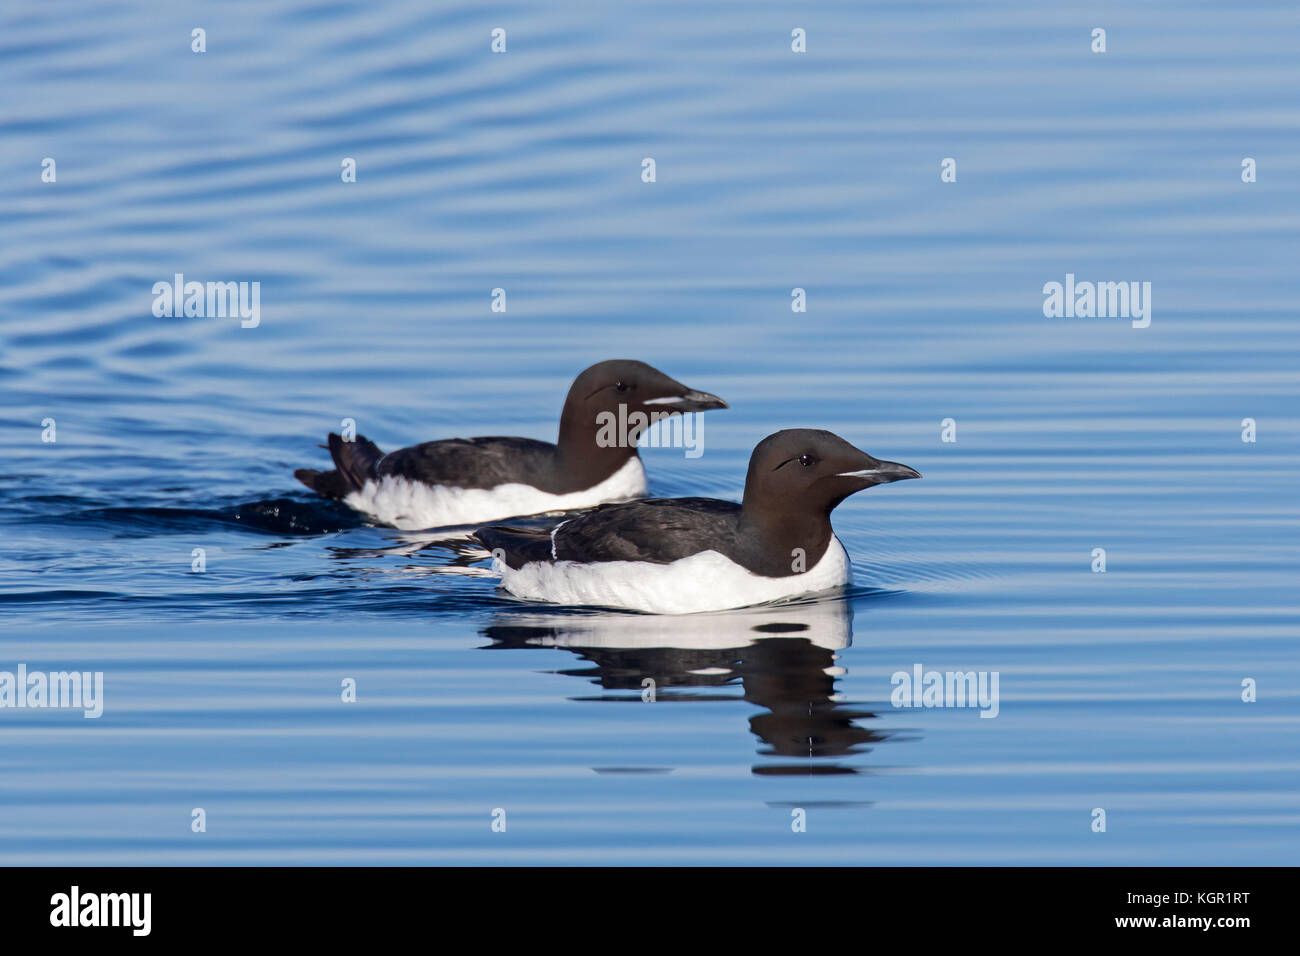 Two thick-billed murres / Brünnich's guillemots (Uria lomvia) swimming in sea, native to the sub-polar regions of the Northern Hemisphere, Svalbard Stock Photo